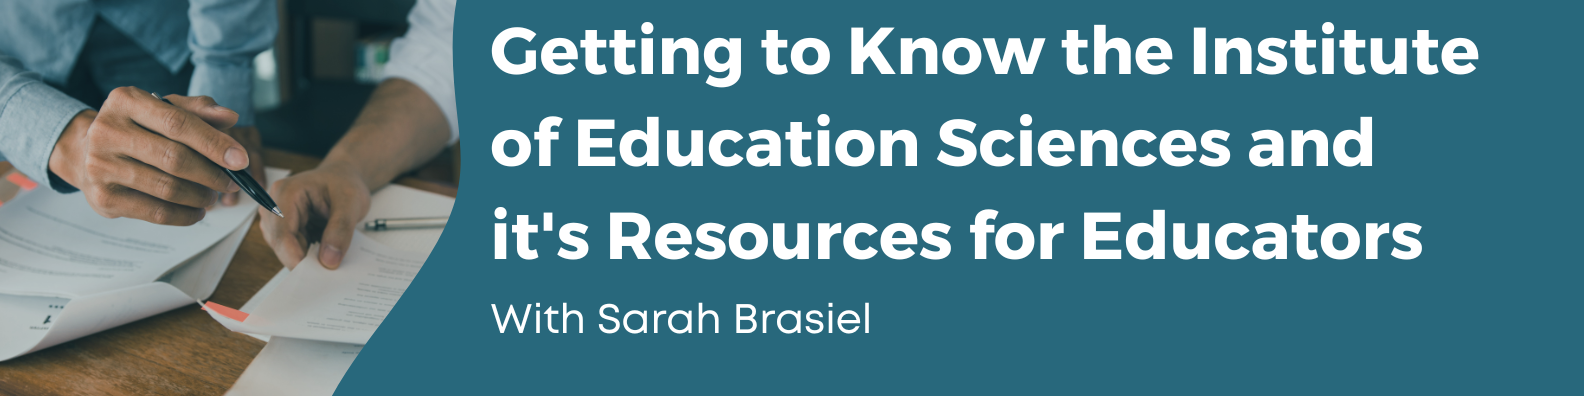 Getting to Know the Institute of Education Sciences and it's Resources for Educators with Sarah Brasiel